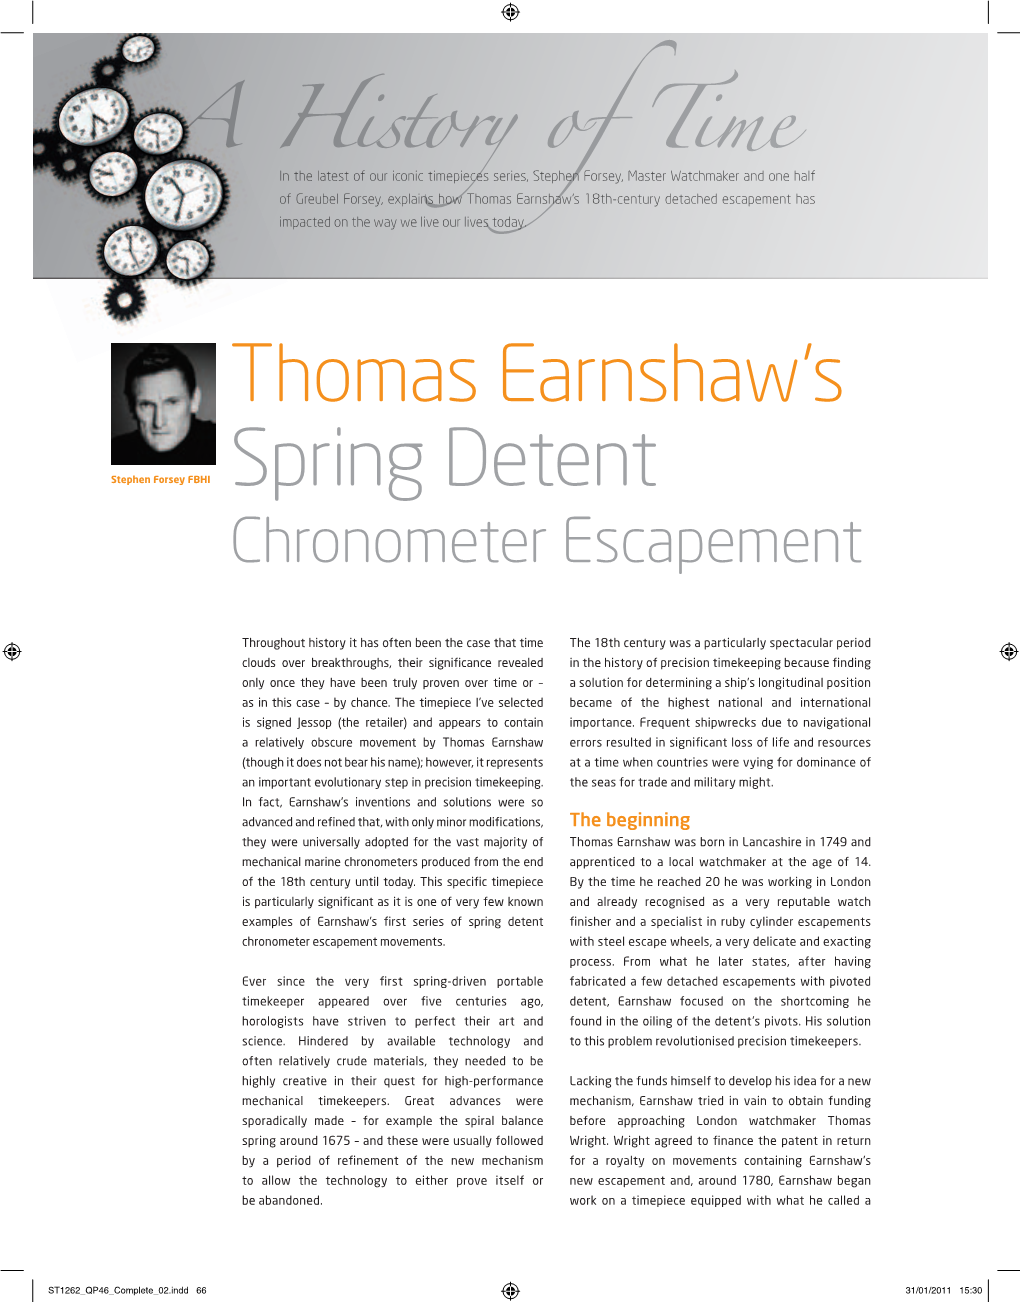 Thomas Earnshaw’S 18Th-Century Detached Escapement Has Impacted on the Way We Live Our Lives Today